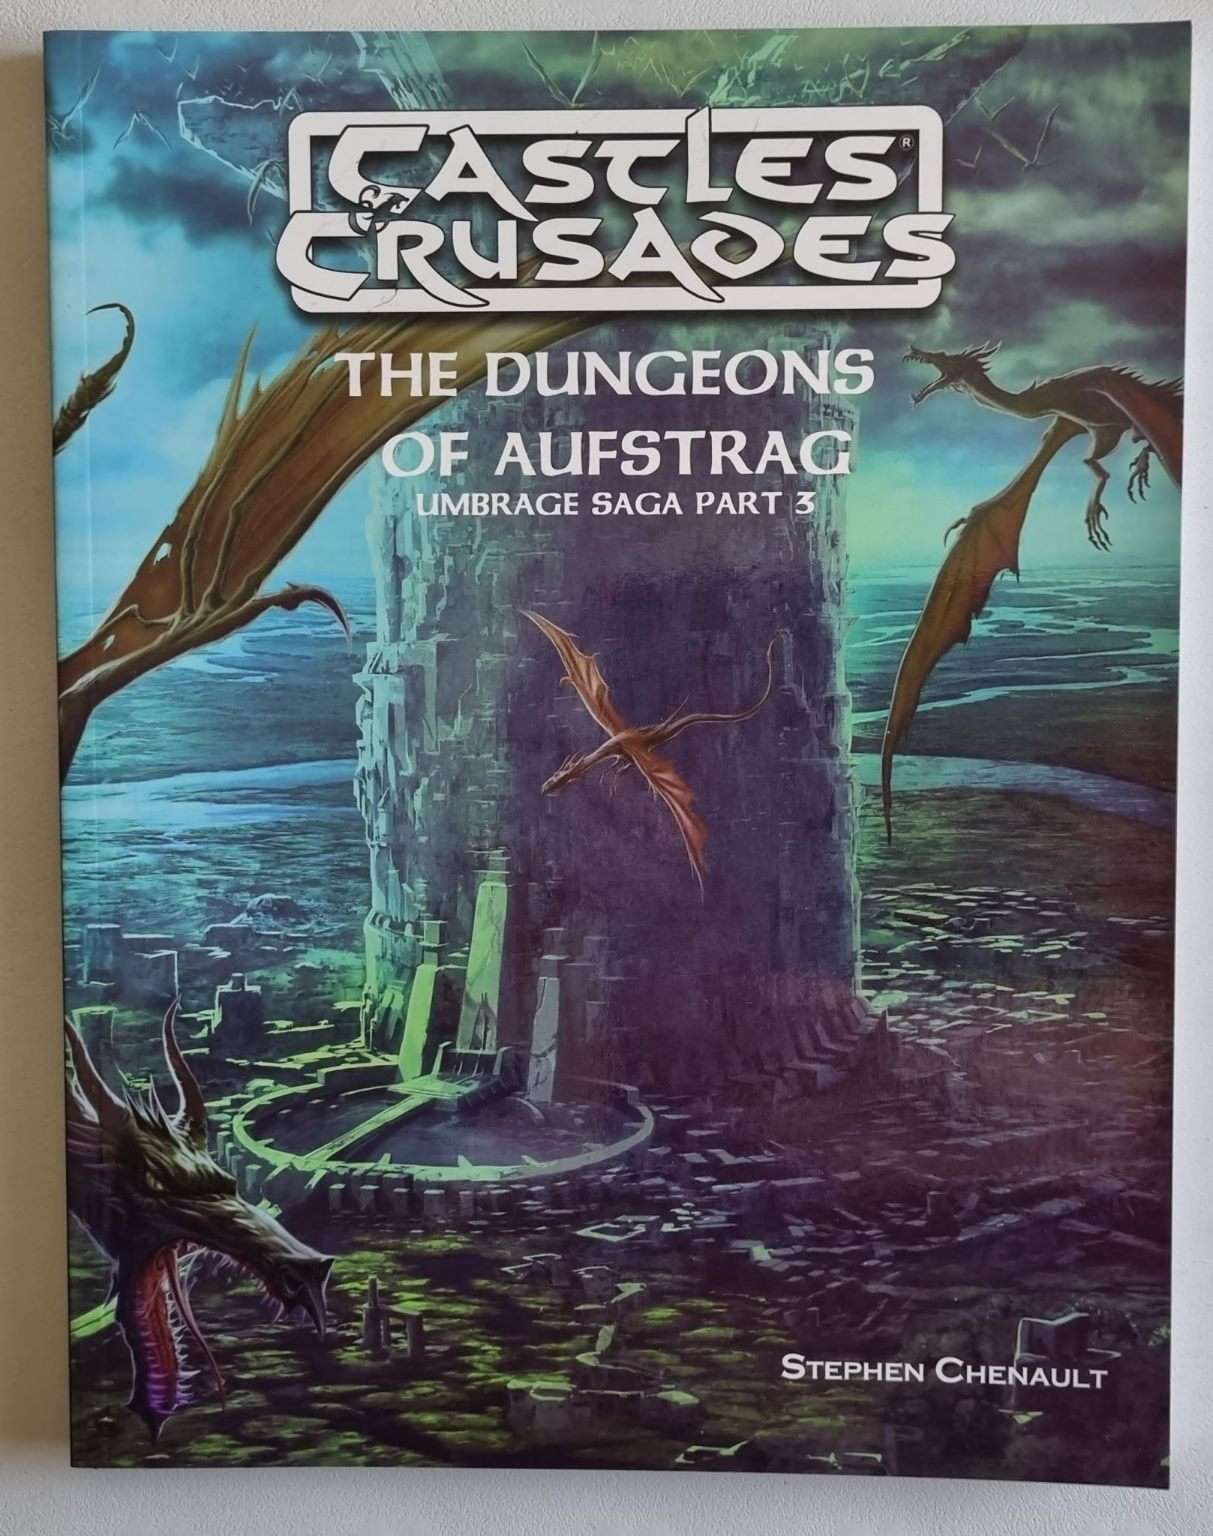 Castles and Crusades - The Dungeons of Aufstrag (Umbrae Saga Part 3)